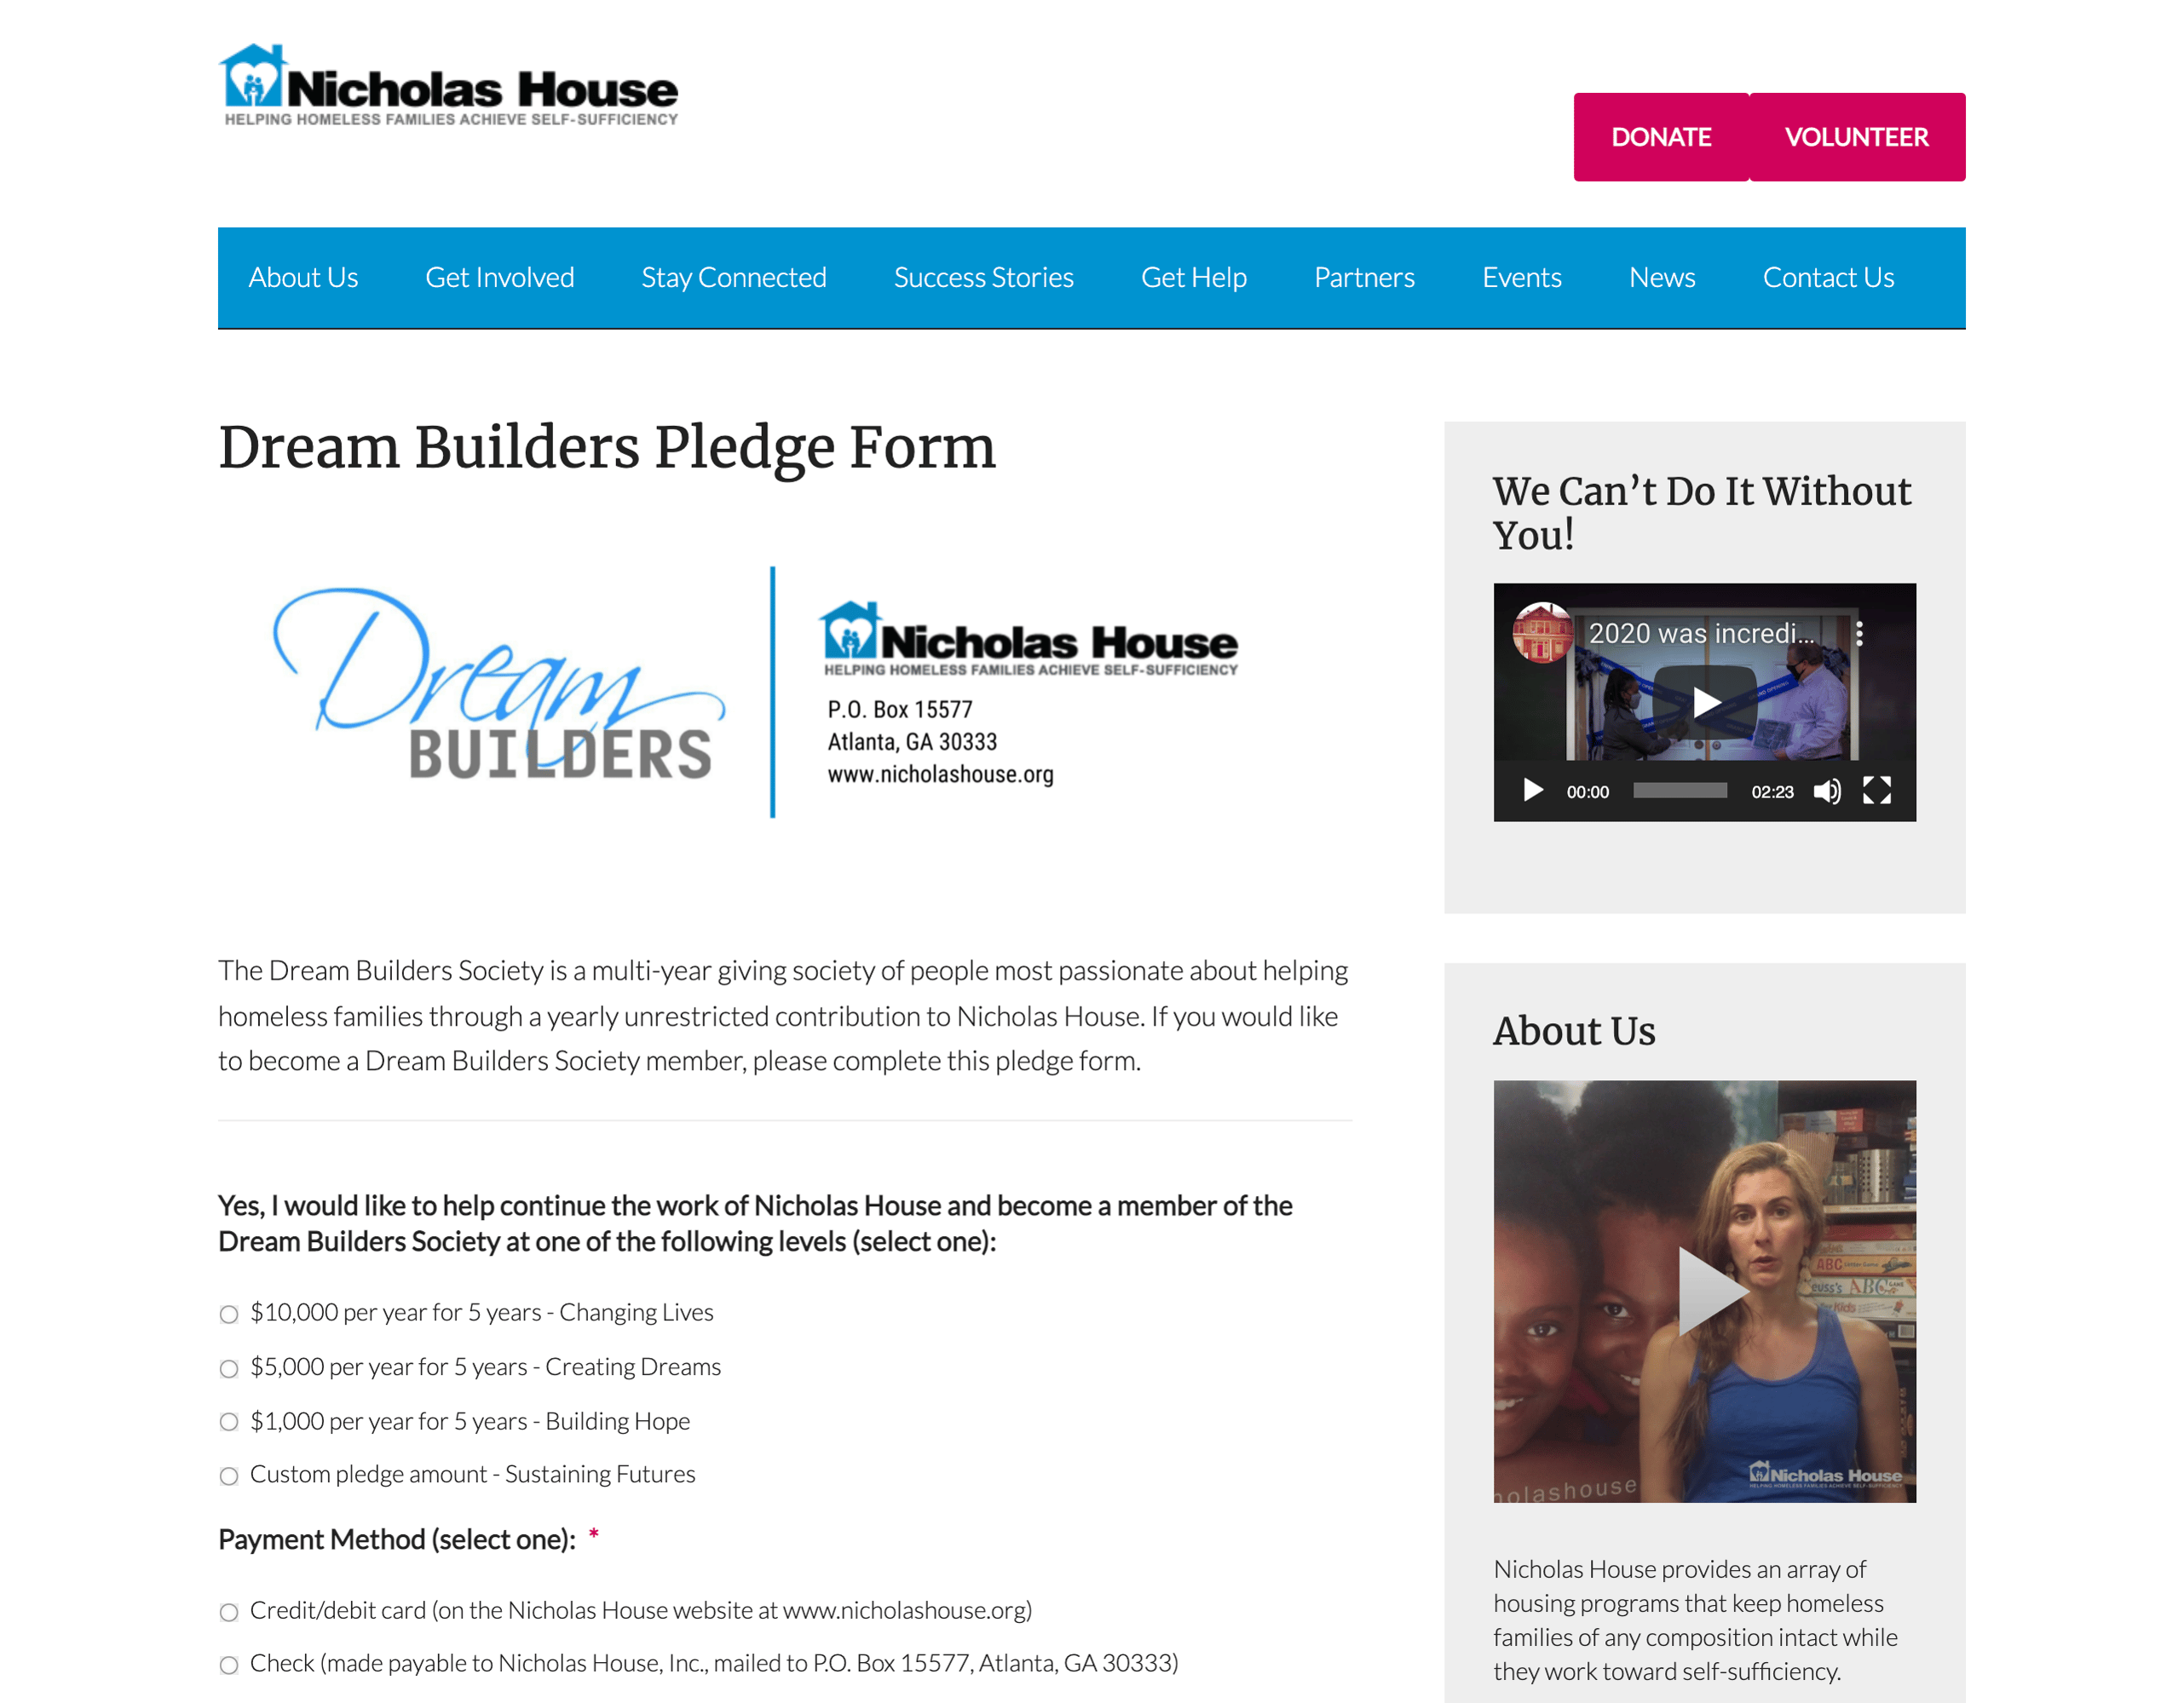 screenshot of Nicholas House's "Dream Builders Pledge Form" with, from left to right and top to bottom: Dream Builders logo, Nicholas House logo, video about 2020 impact, explanation of Dream Builders (multi-year giving club), donation amounts, video about the history of Nicholas House, payment method